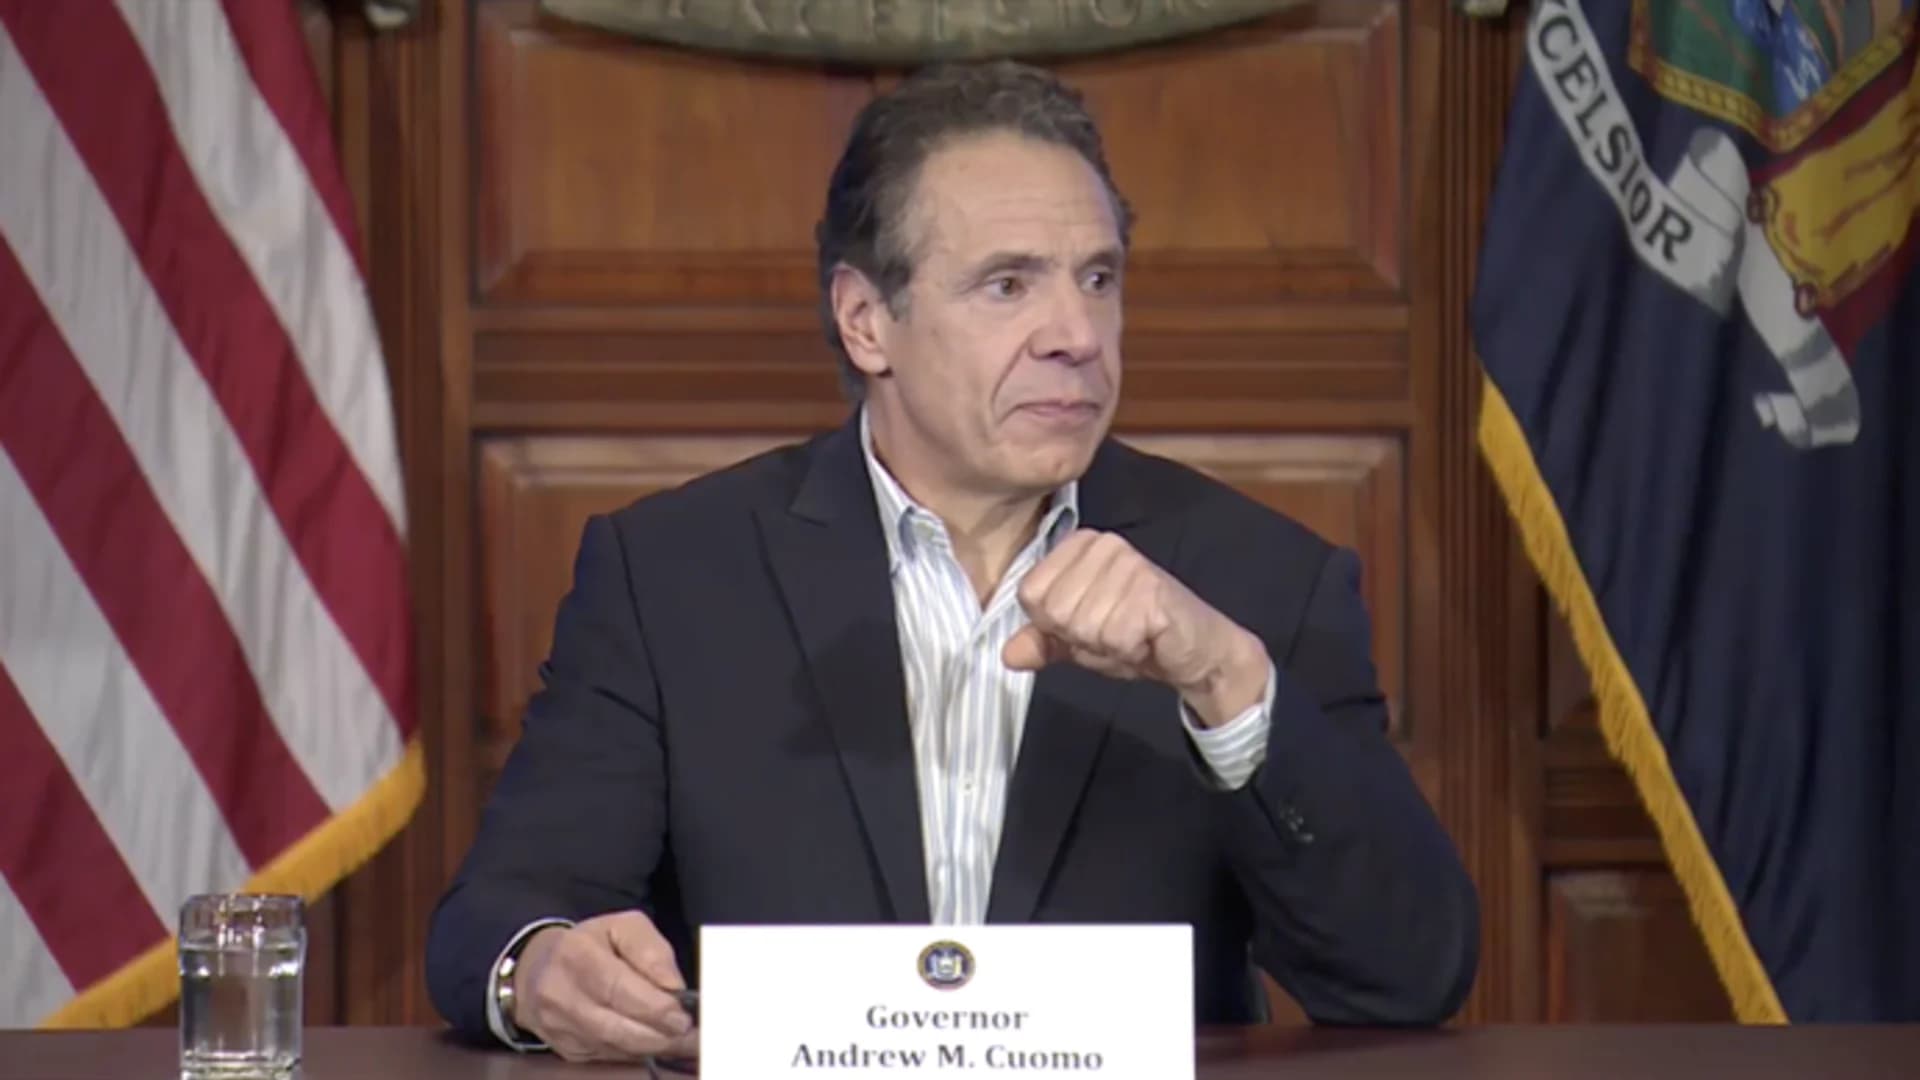 Gov. Cuomo extends order for nonessential workers to stay home, NY cases now at 59,513